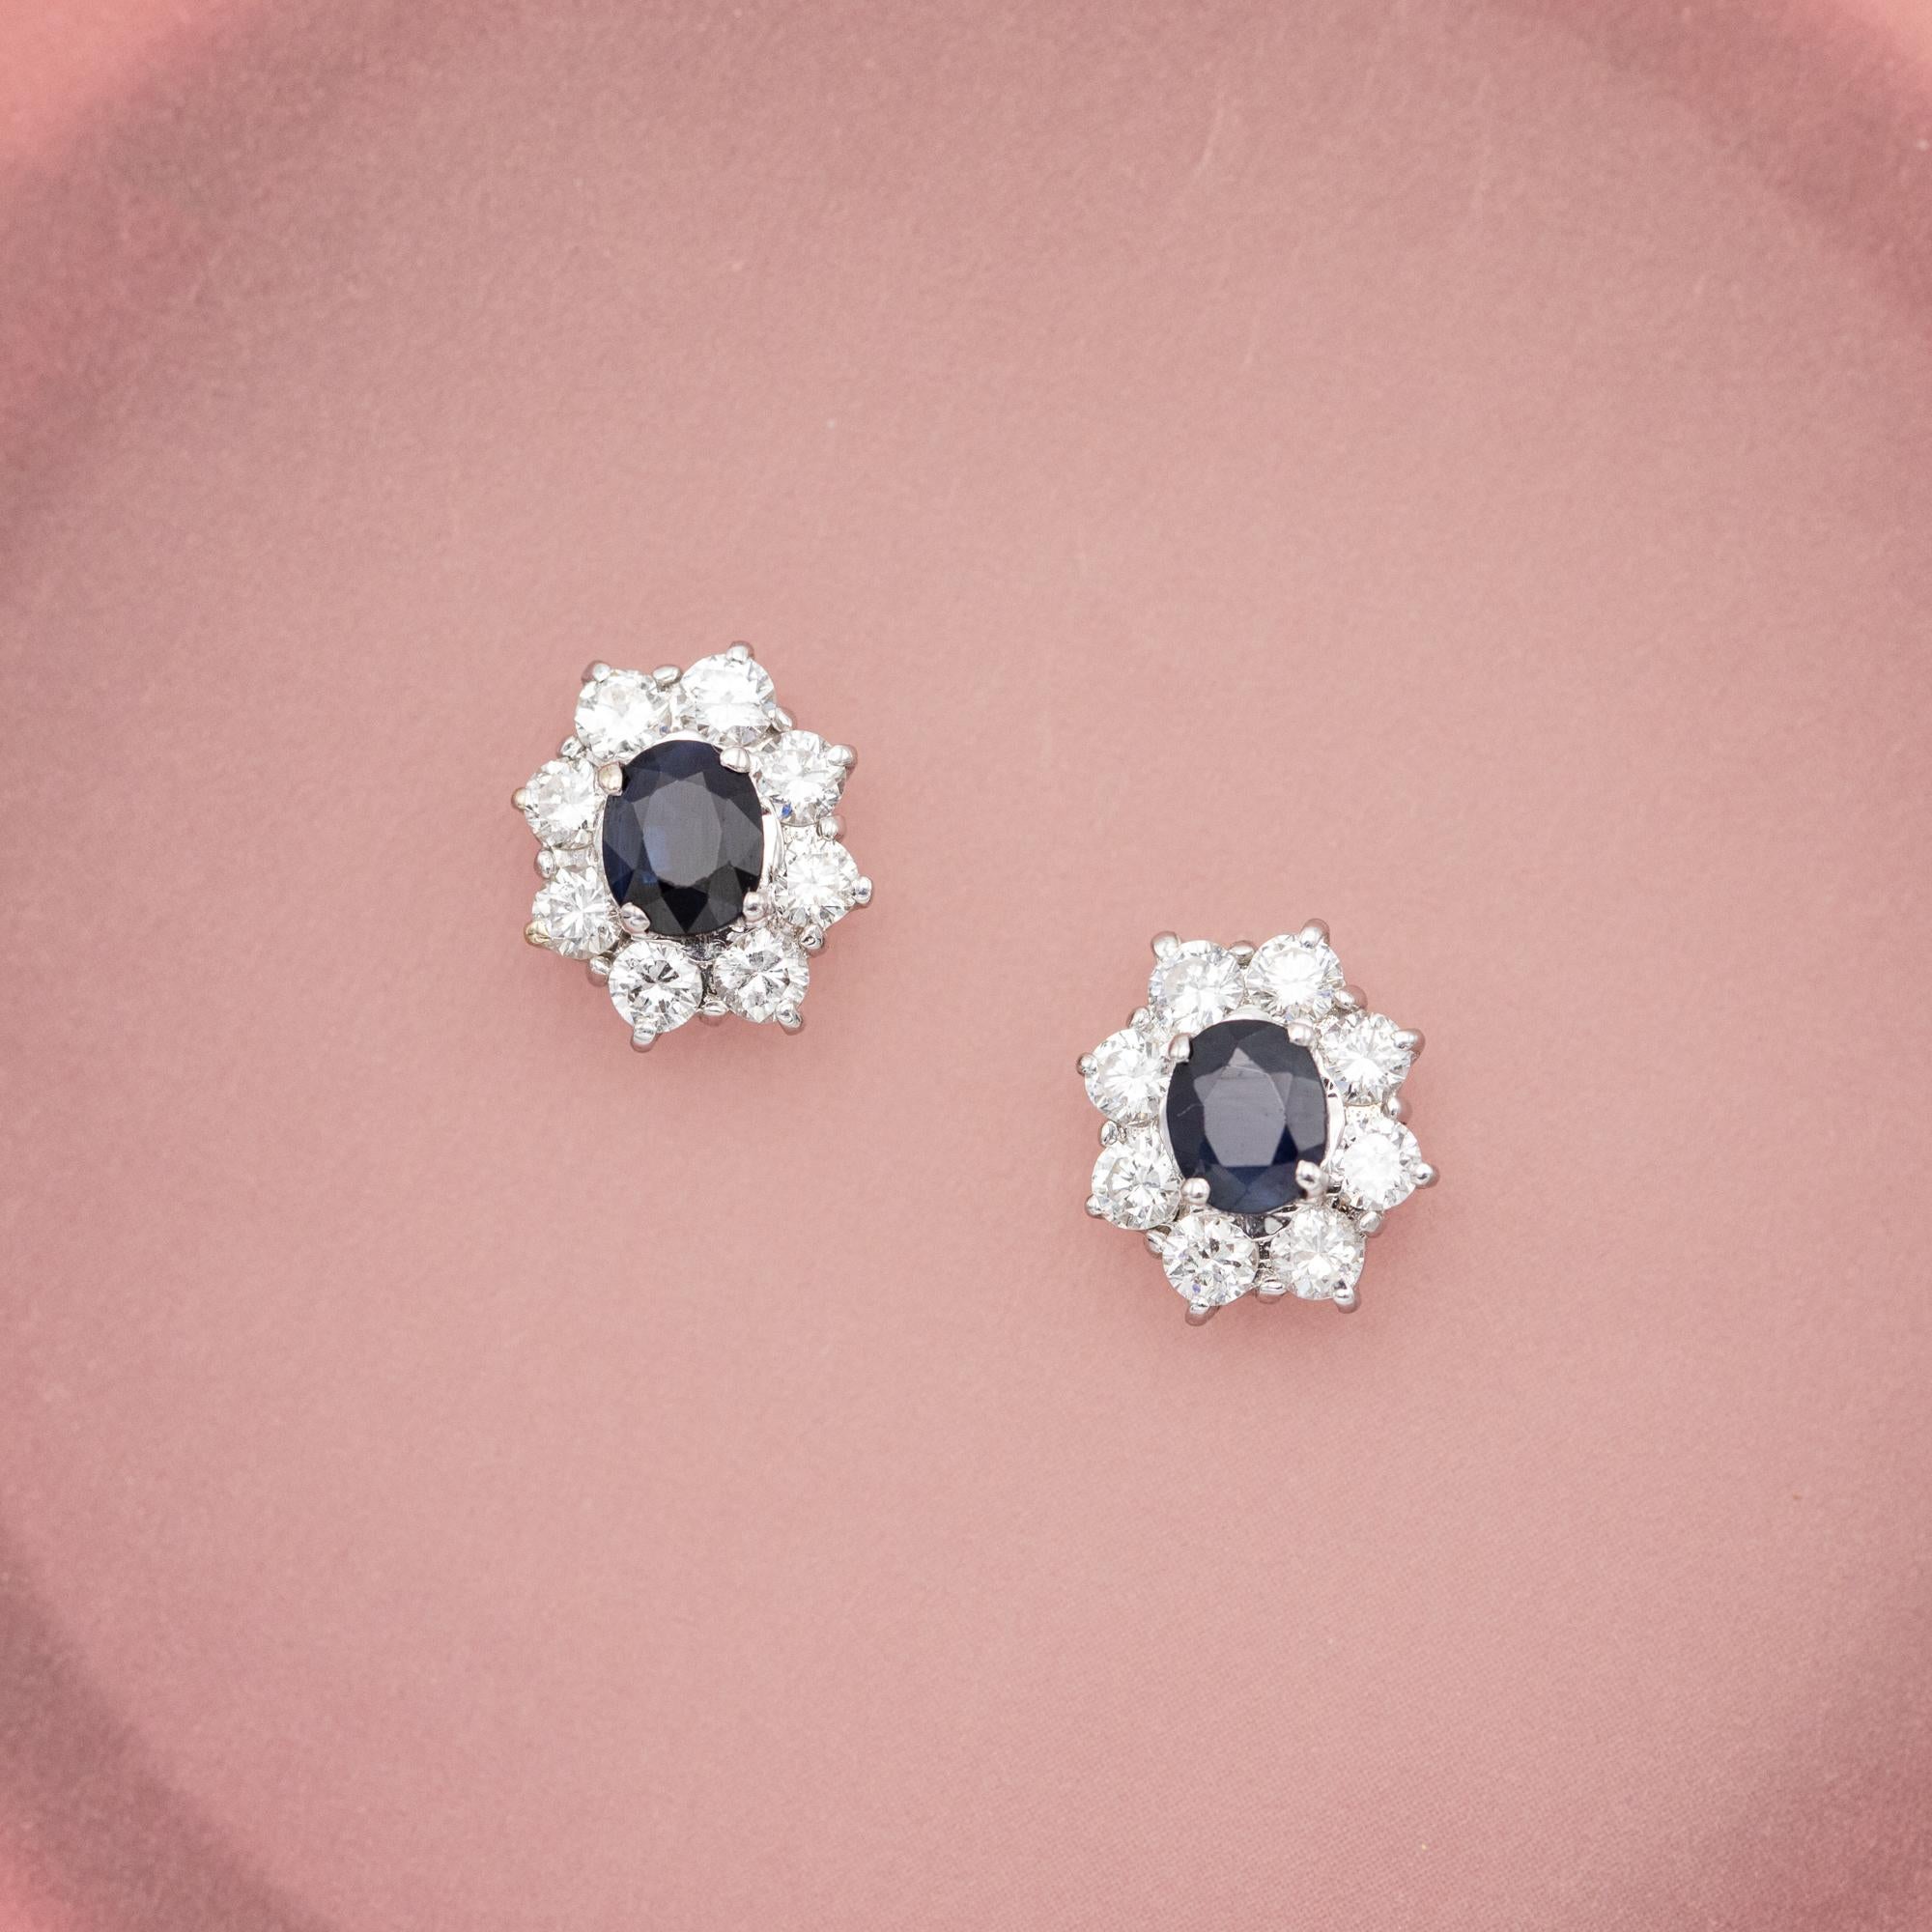 18K gold earrings - Small floral diamond and sapphire cluster studs - classic In Good Condition For Sale In Antwerp, BE